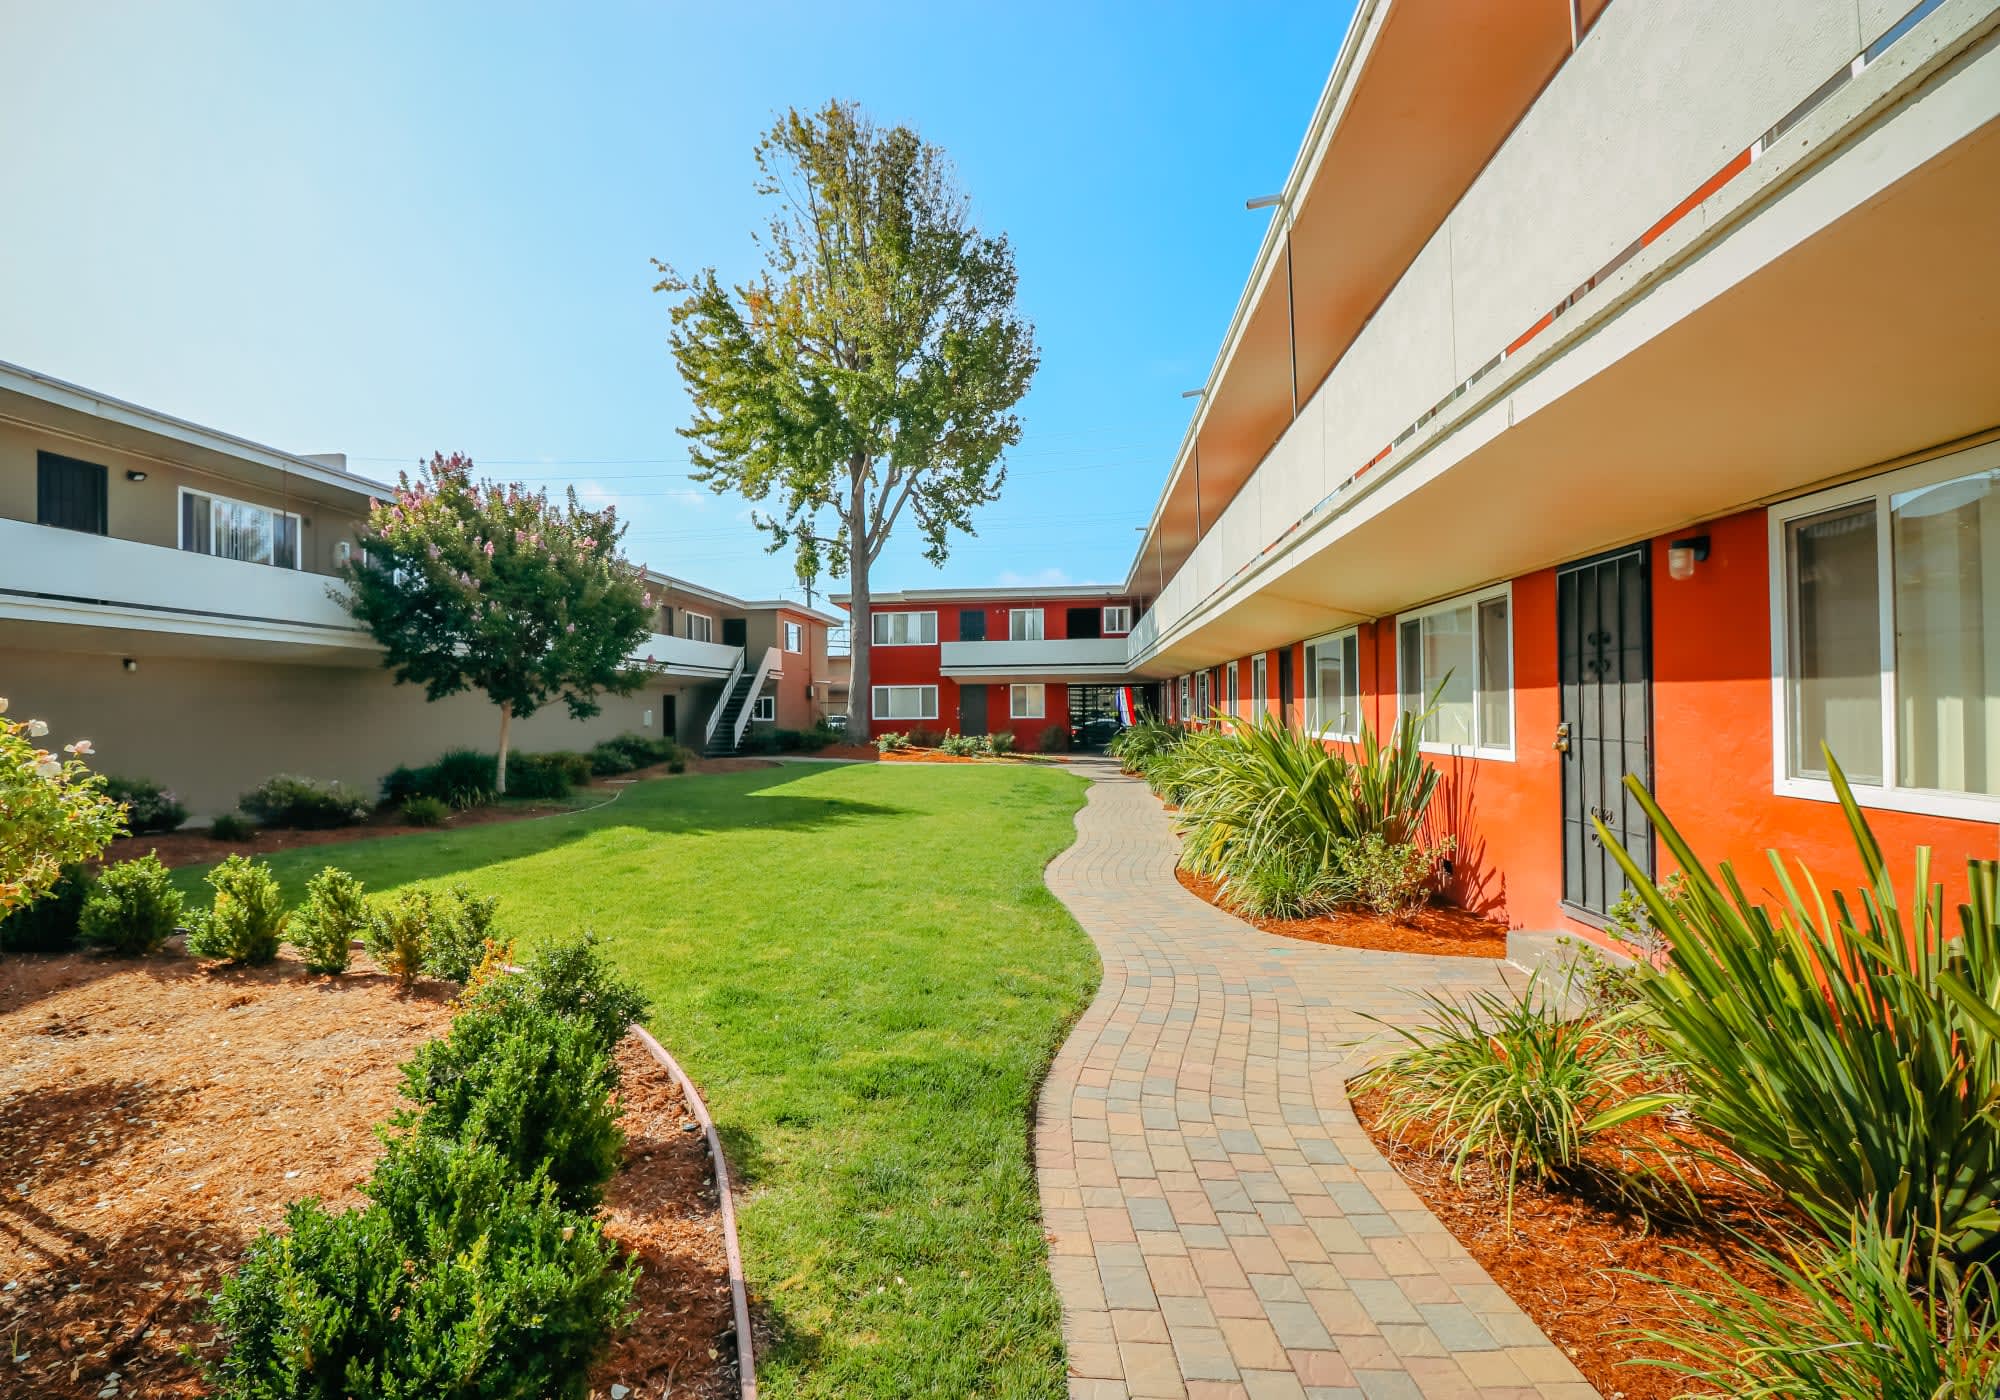 Sunny outdoor area with grass patch at Garden Court Apartments in Alameda, California